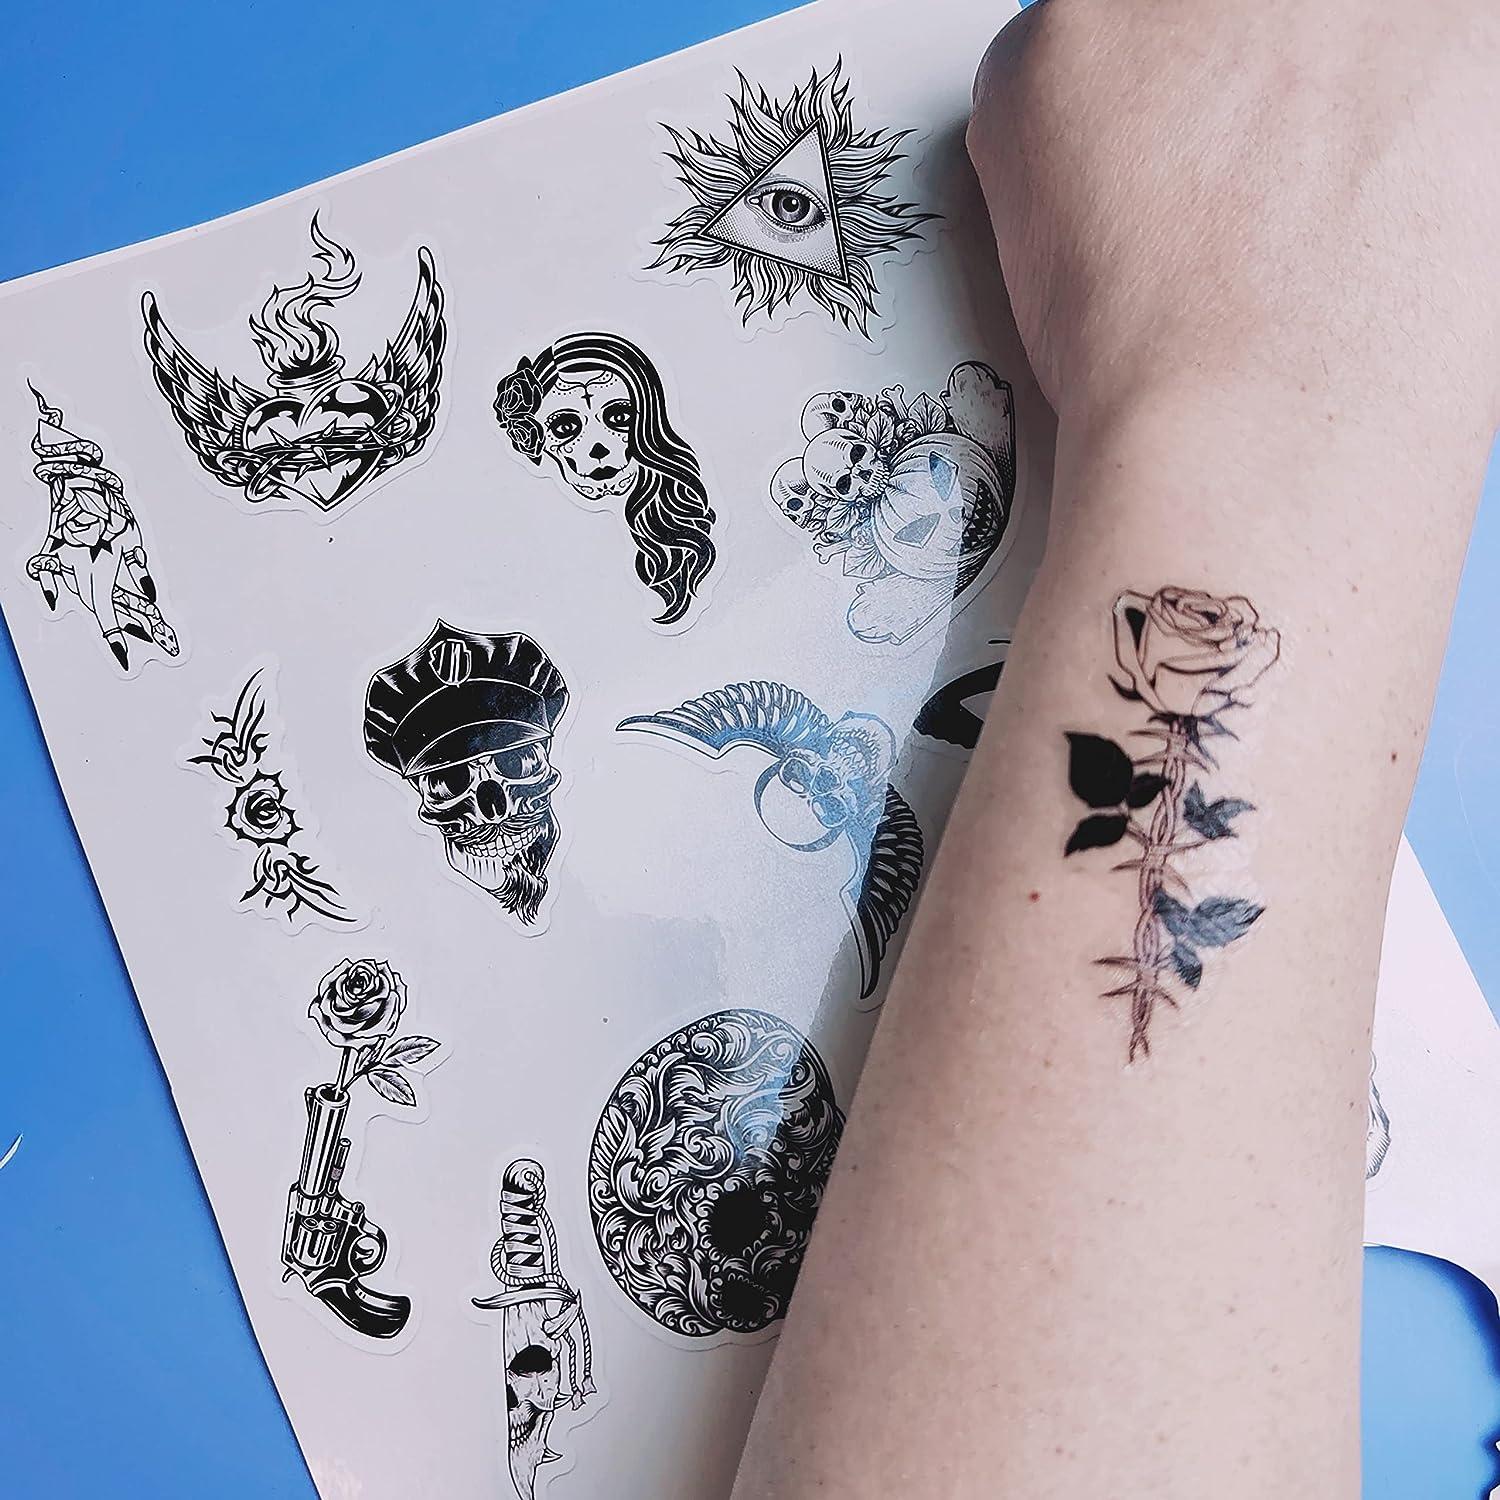 Printable Temporary Tattoo Paper 5 Sheets 8.5x11 inch Transfer